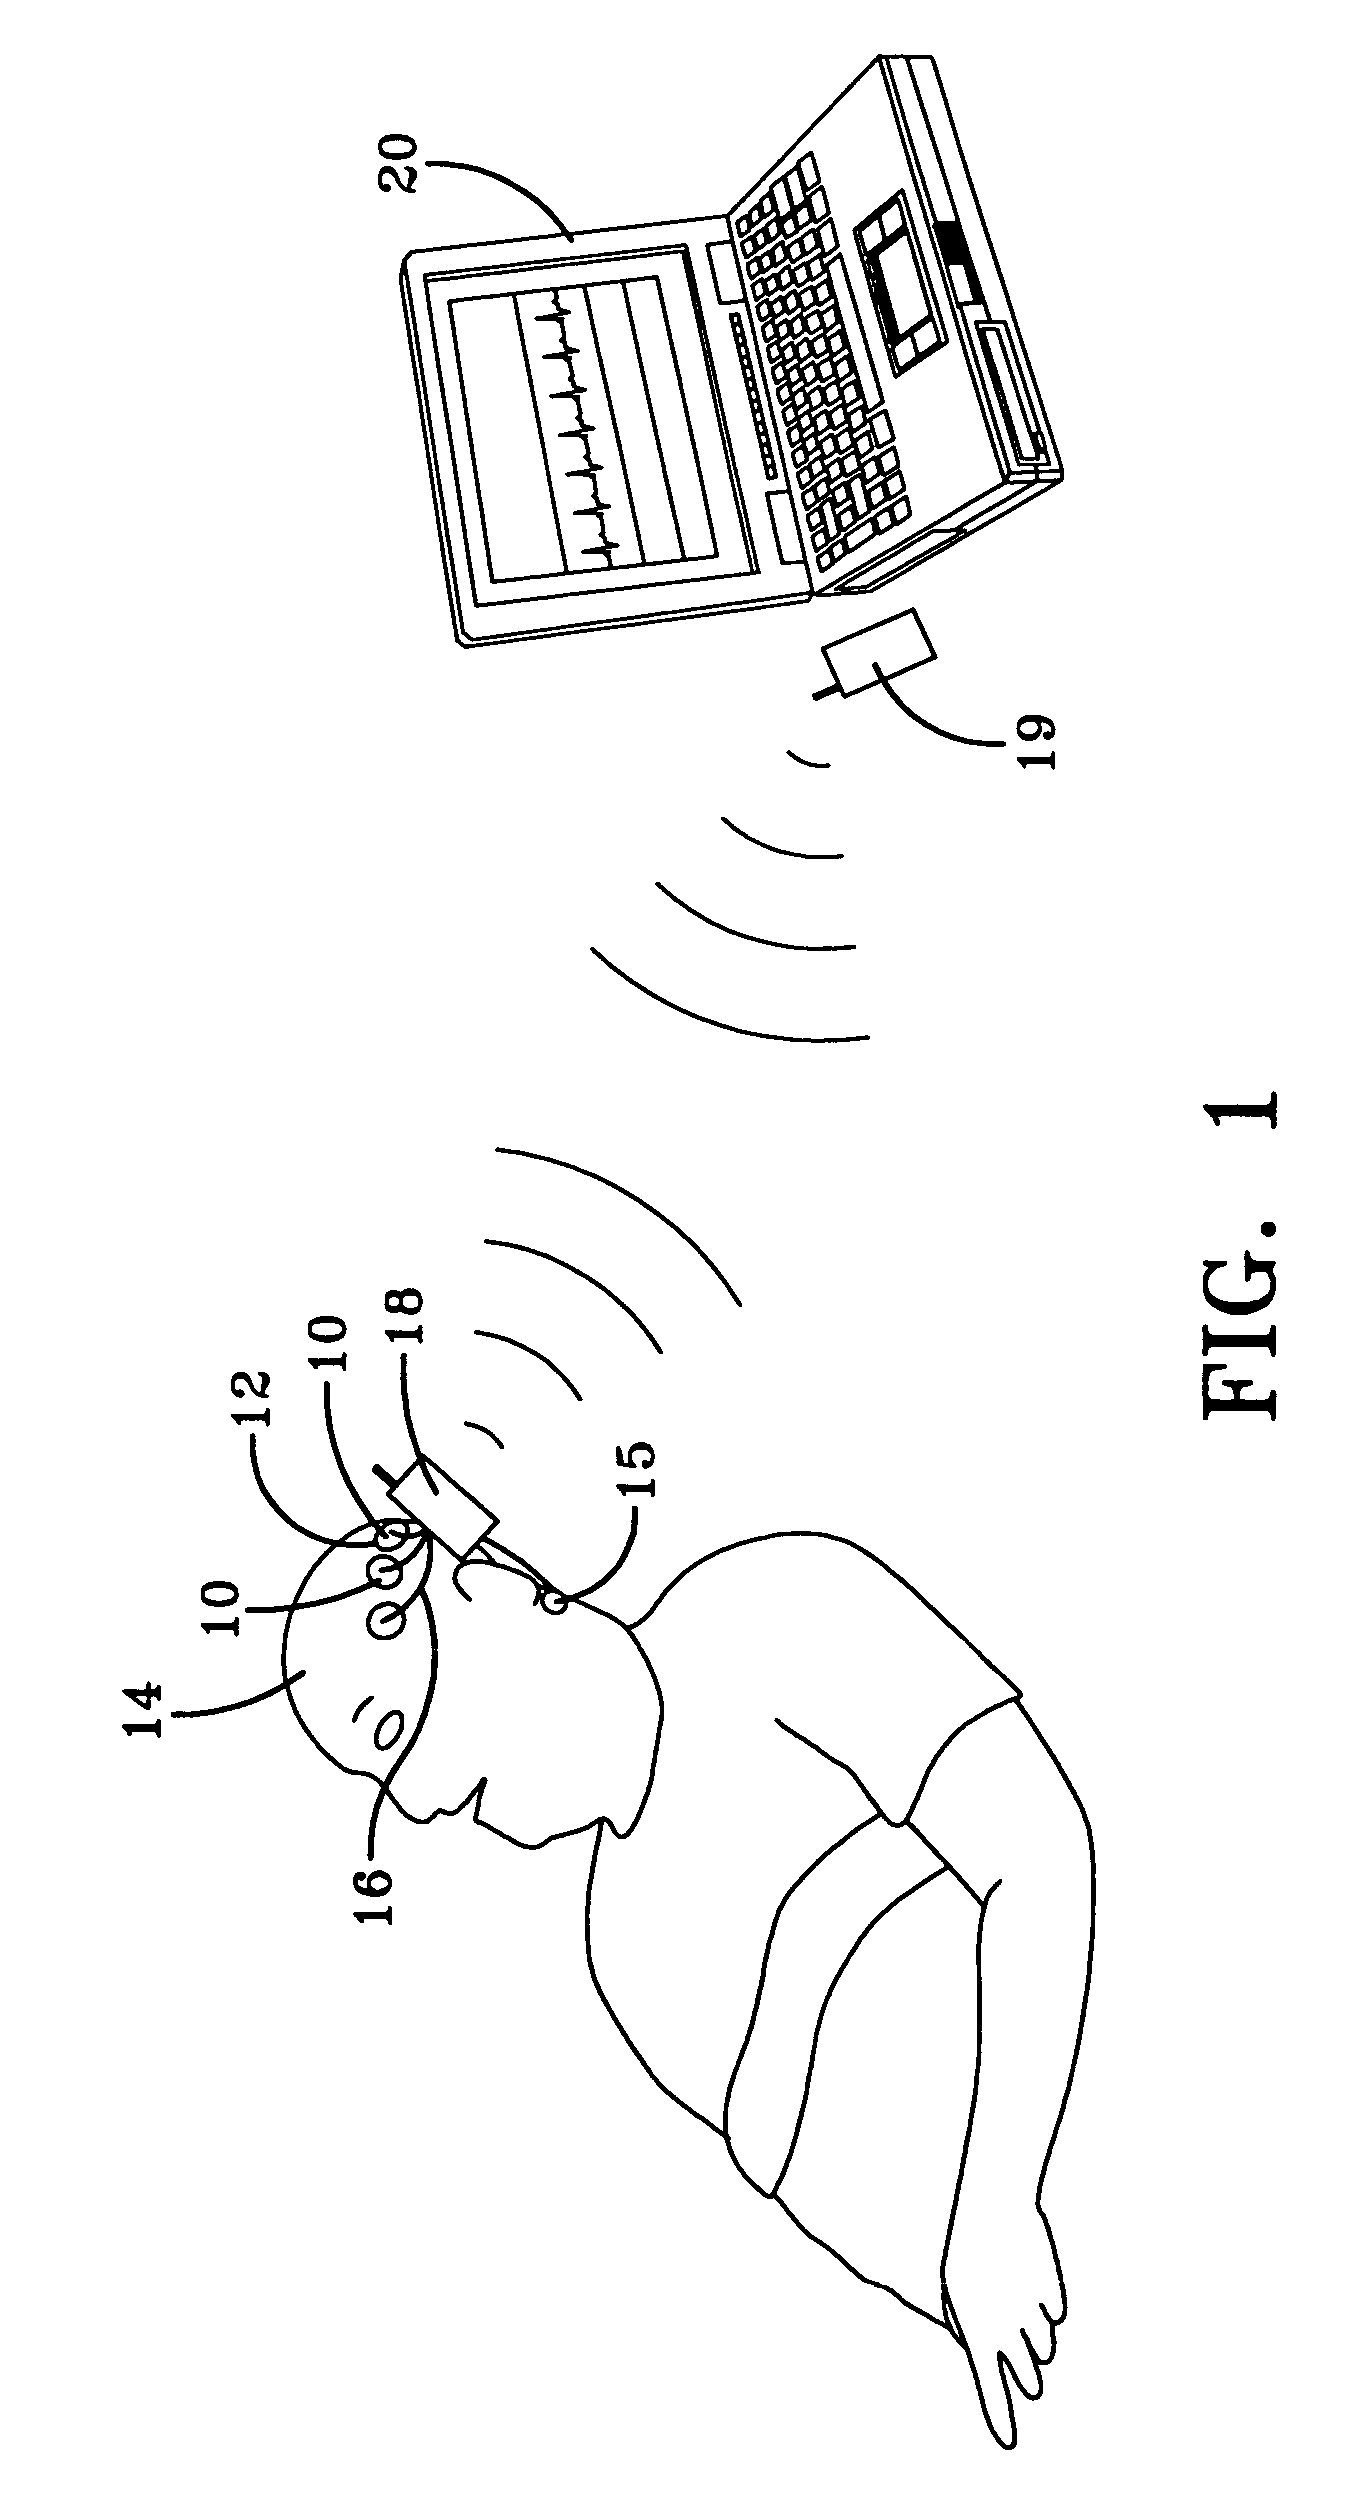 Method of quantifying a subject's wake or sleep state and system for measuring